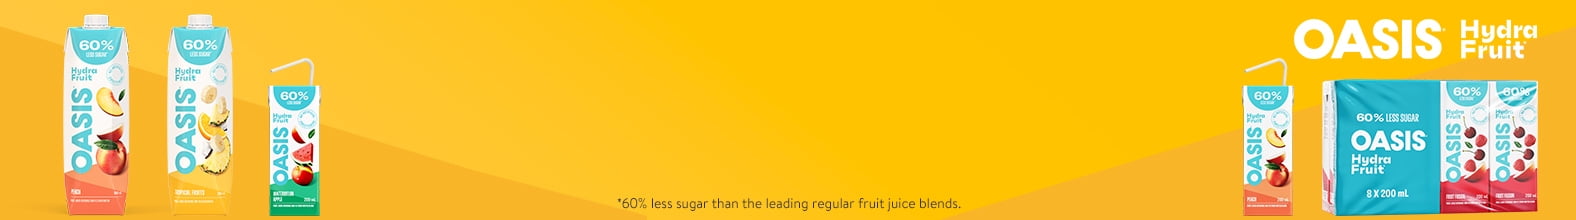 Try Oasis HydraFruit - 60% less sugar.* No compromise.